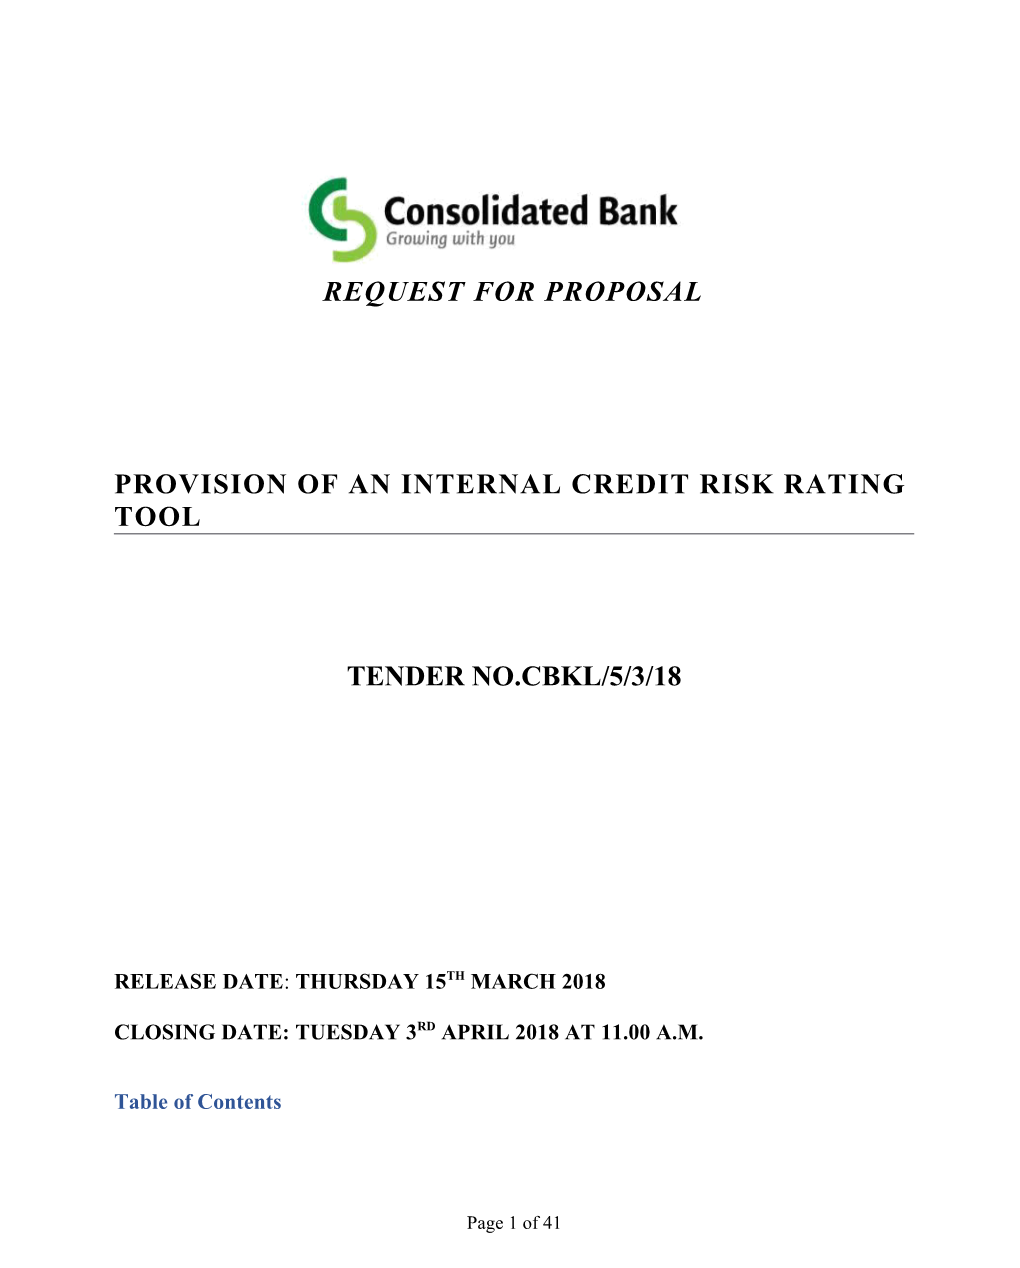 Provision of an Internal Credit Risk Rating Tool